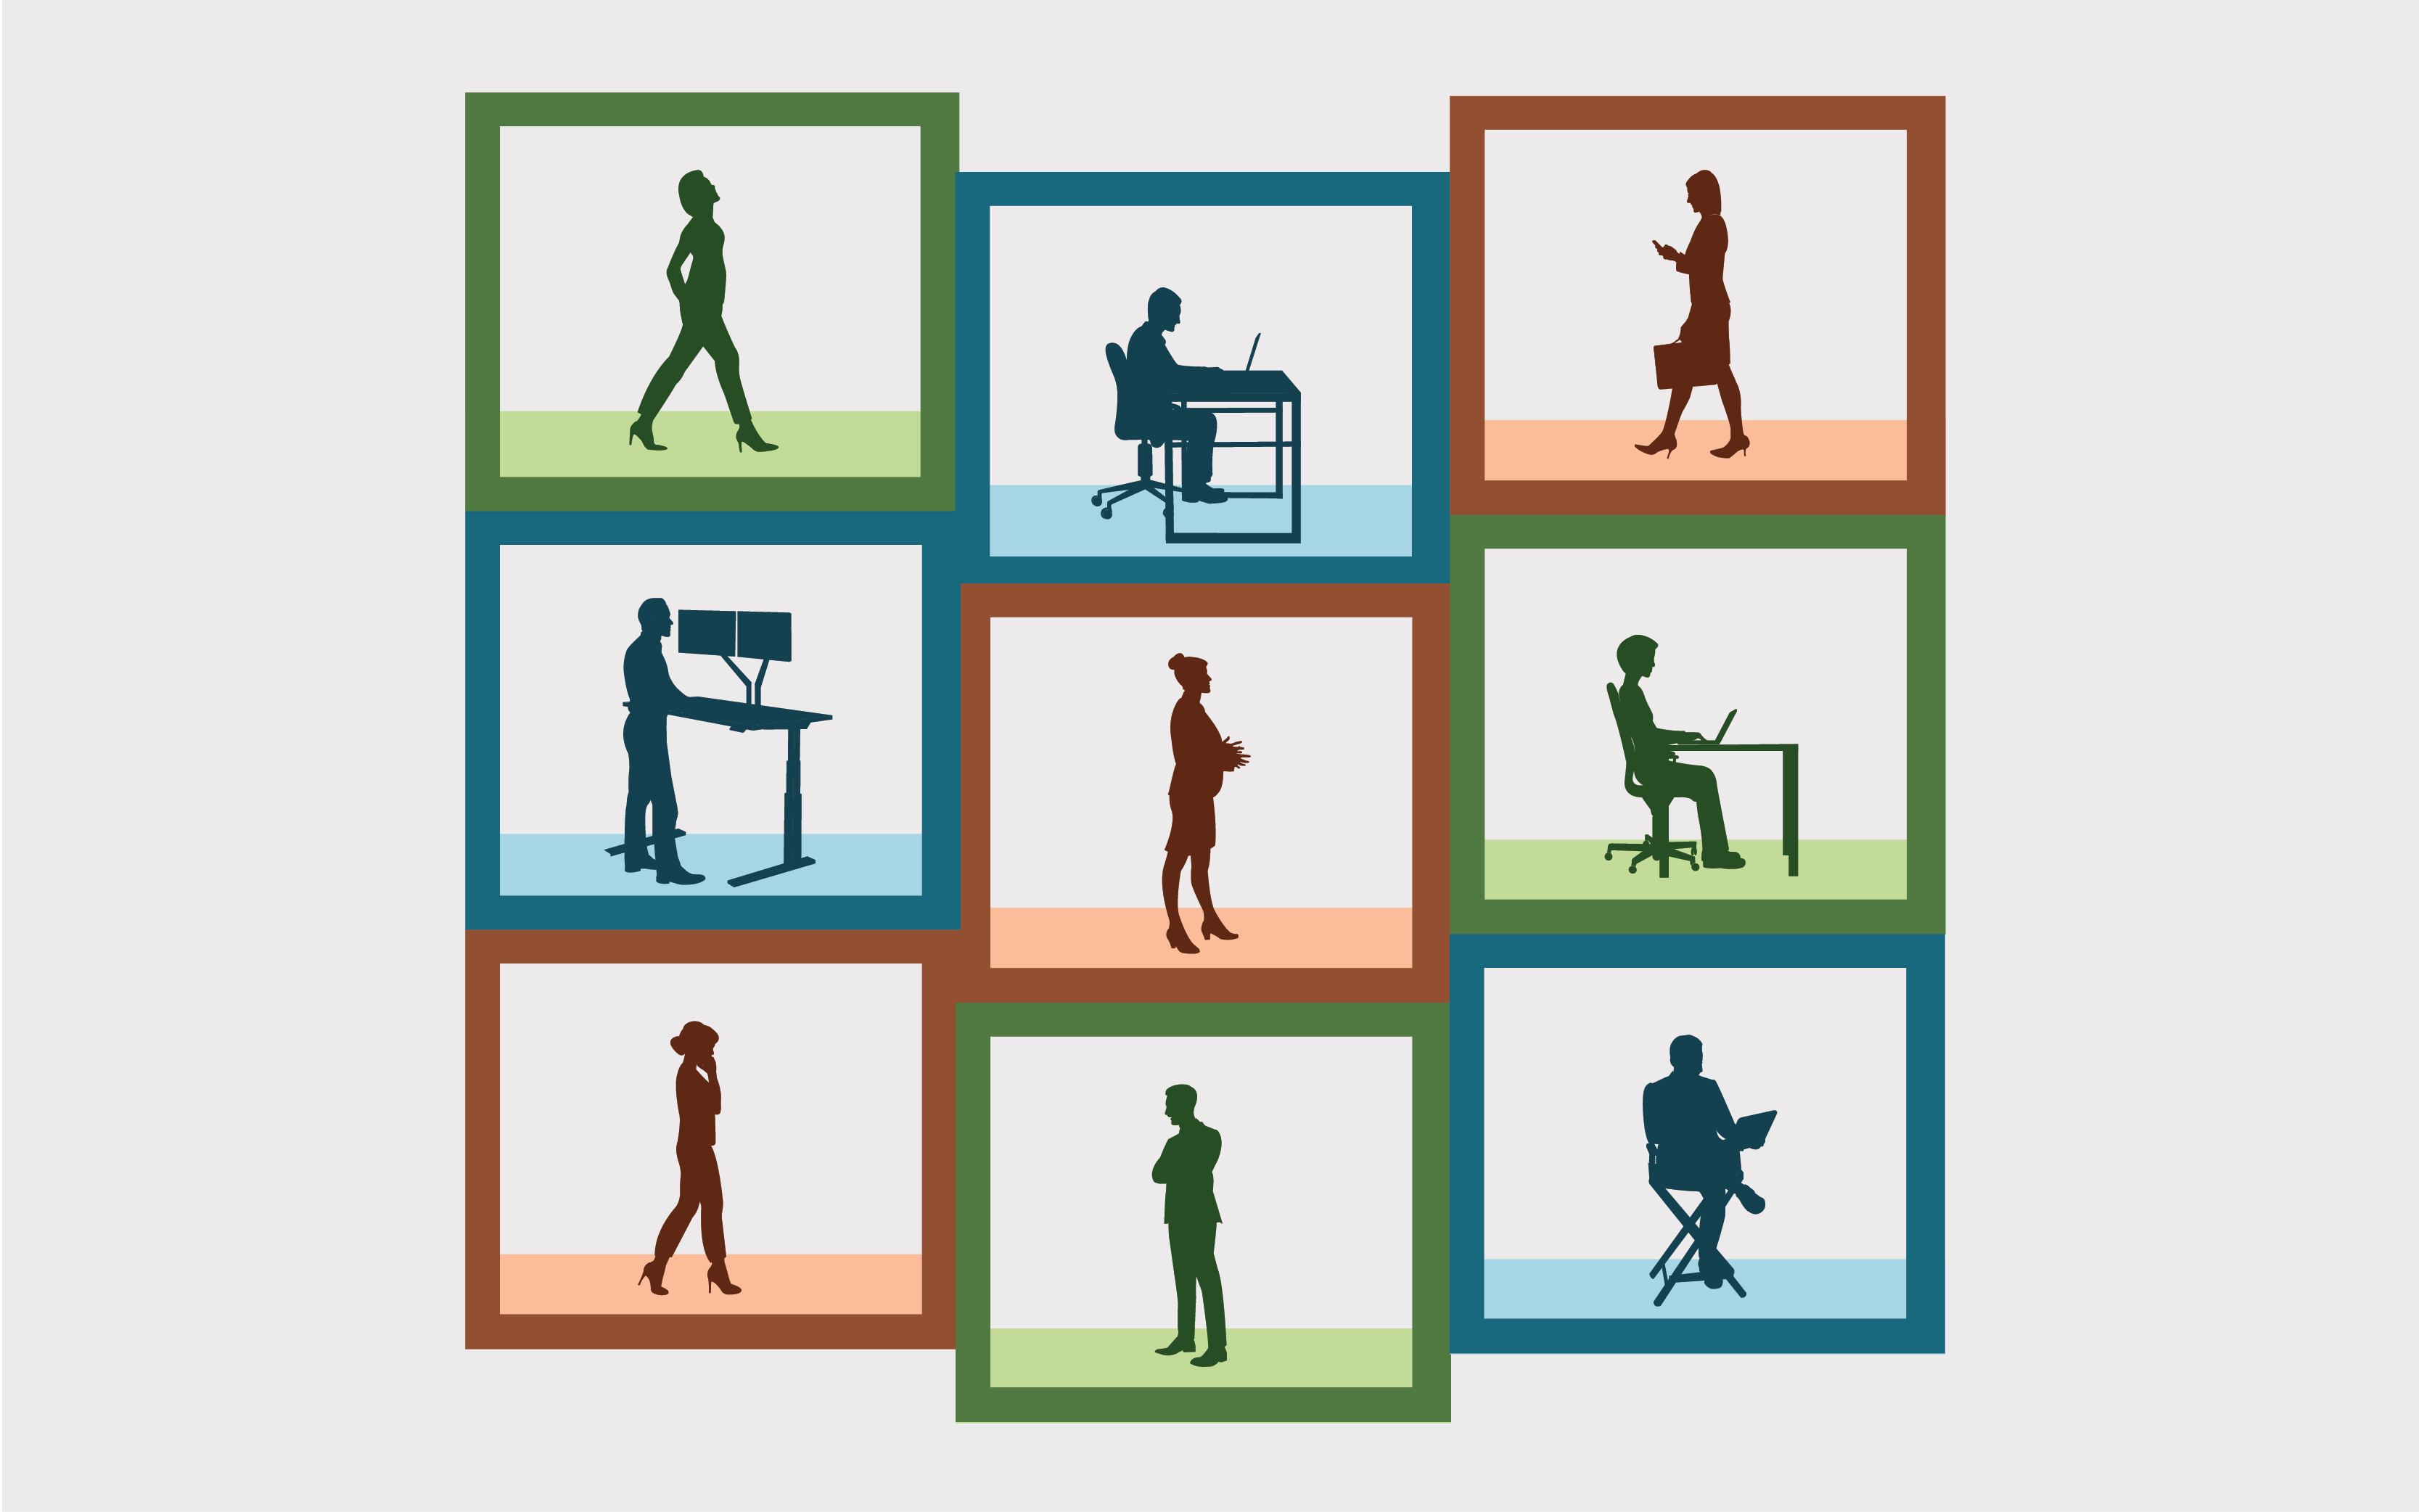 Several people figures working inside of abstract boxes. Illustration.